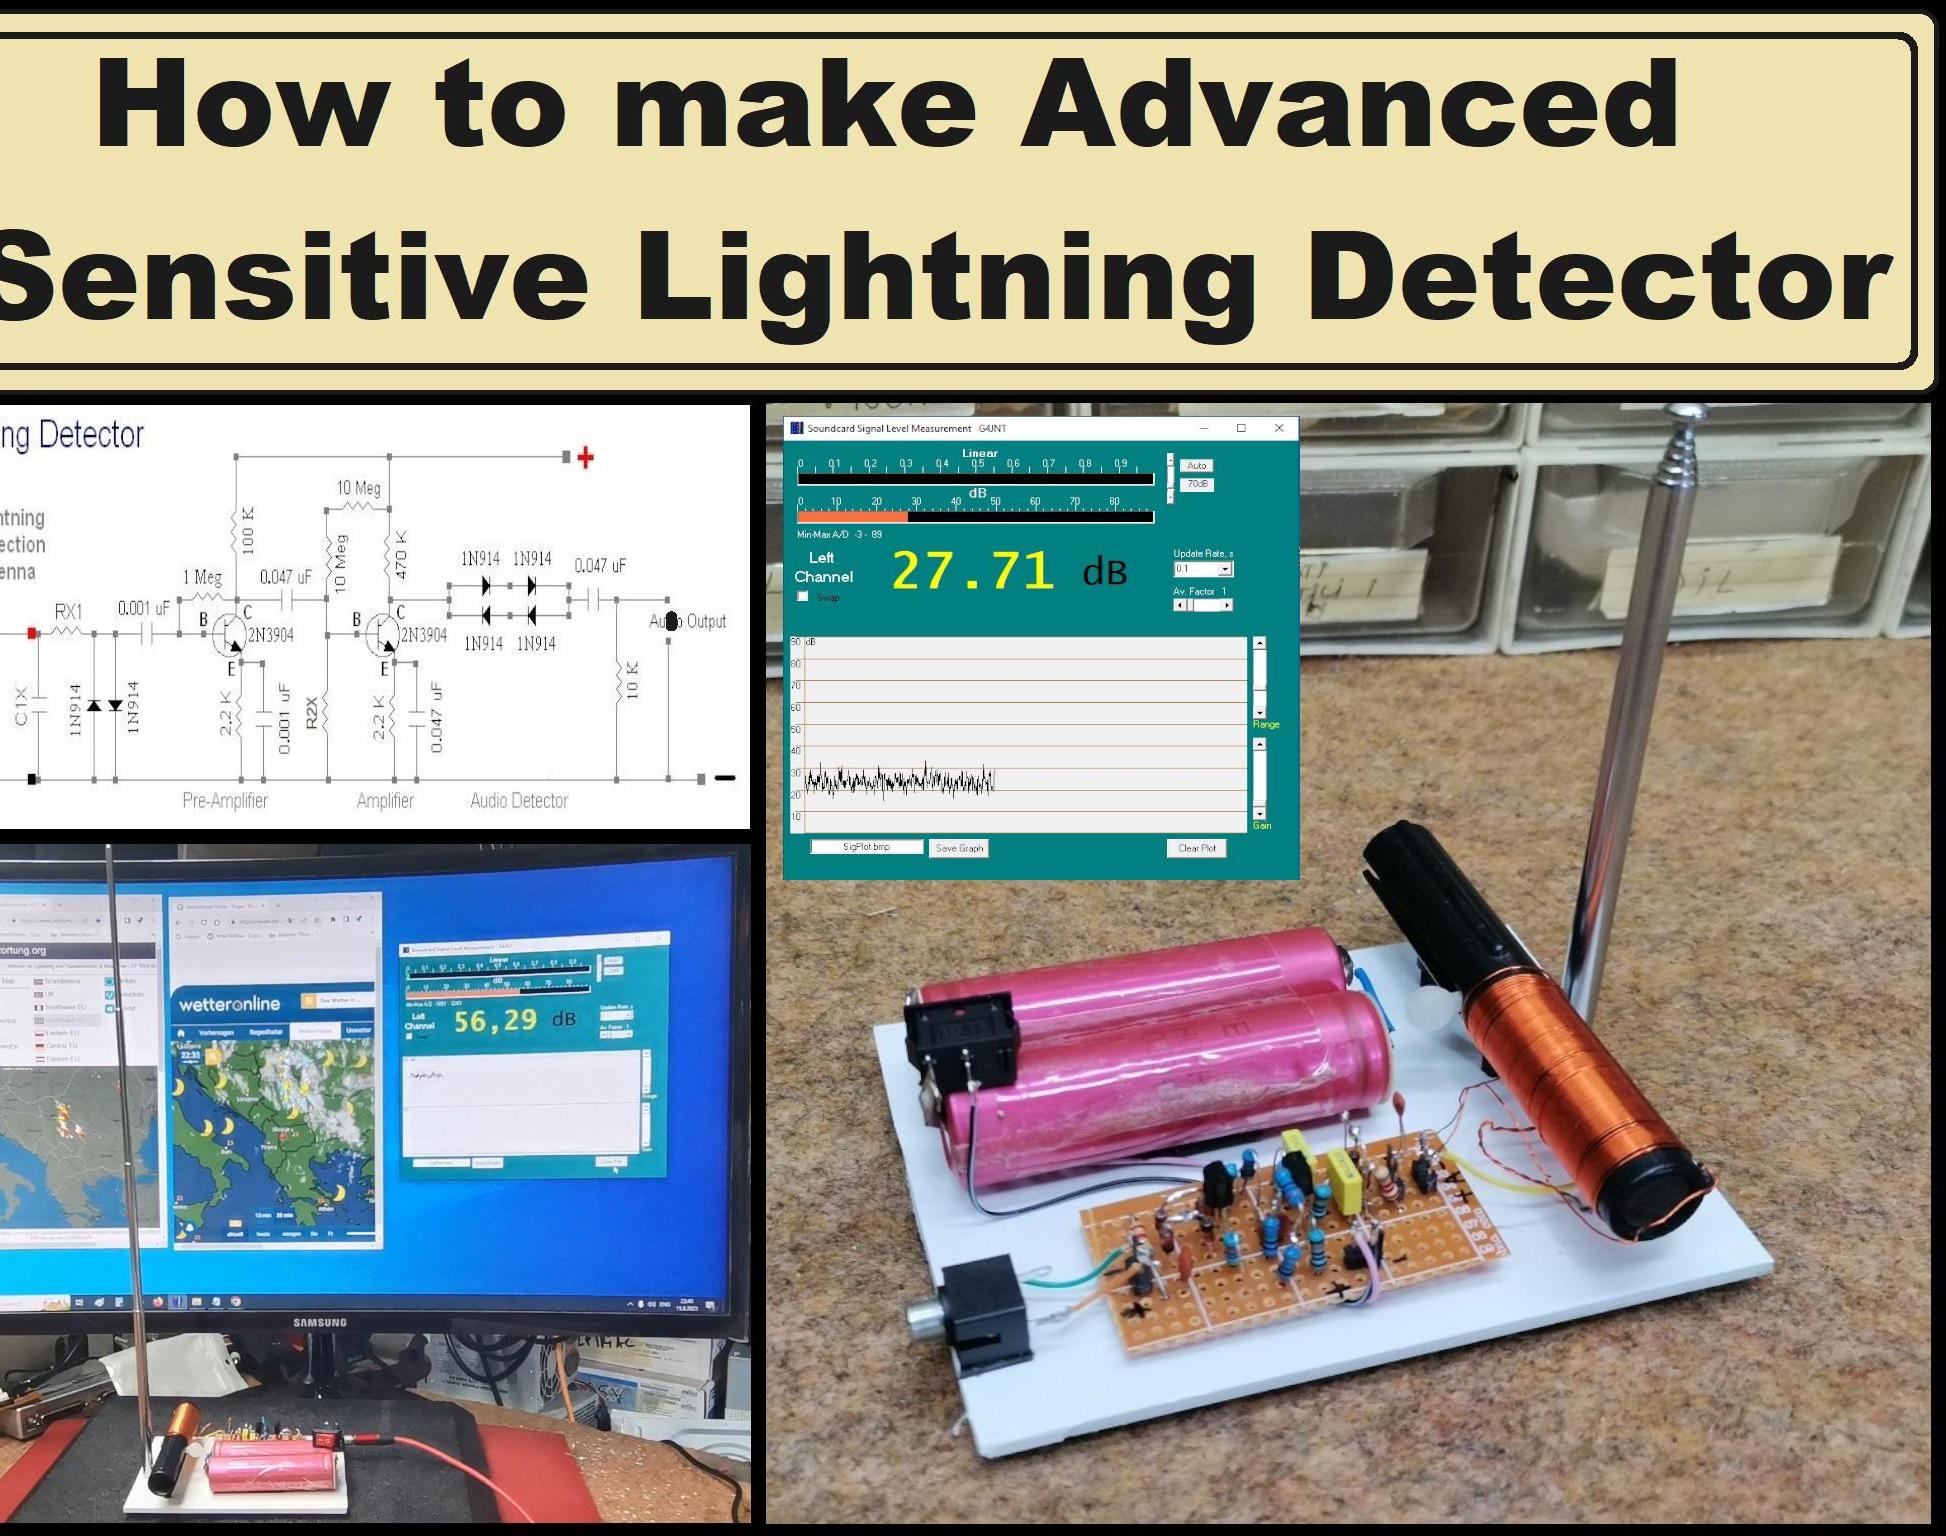 Advanced Sensitive Lightning Detector With PC Graph